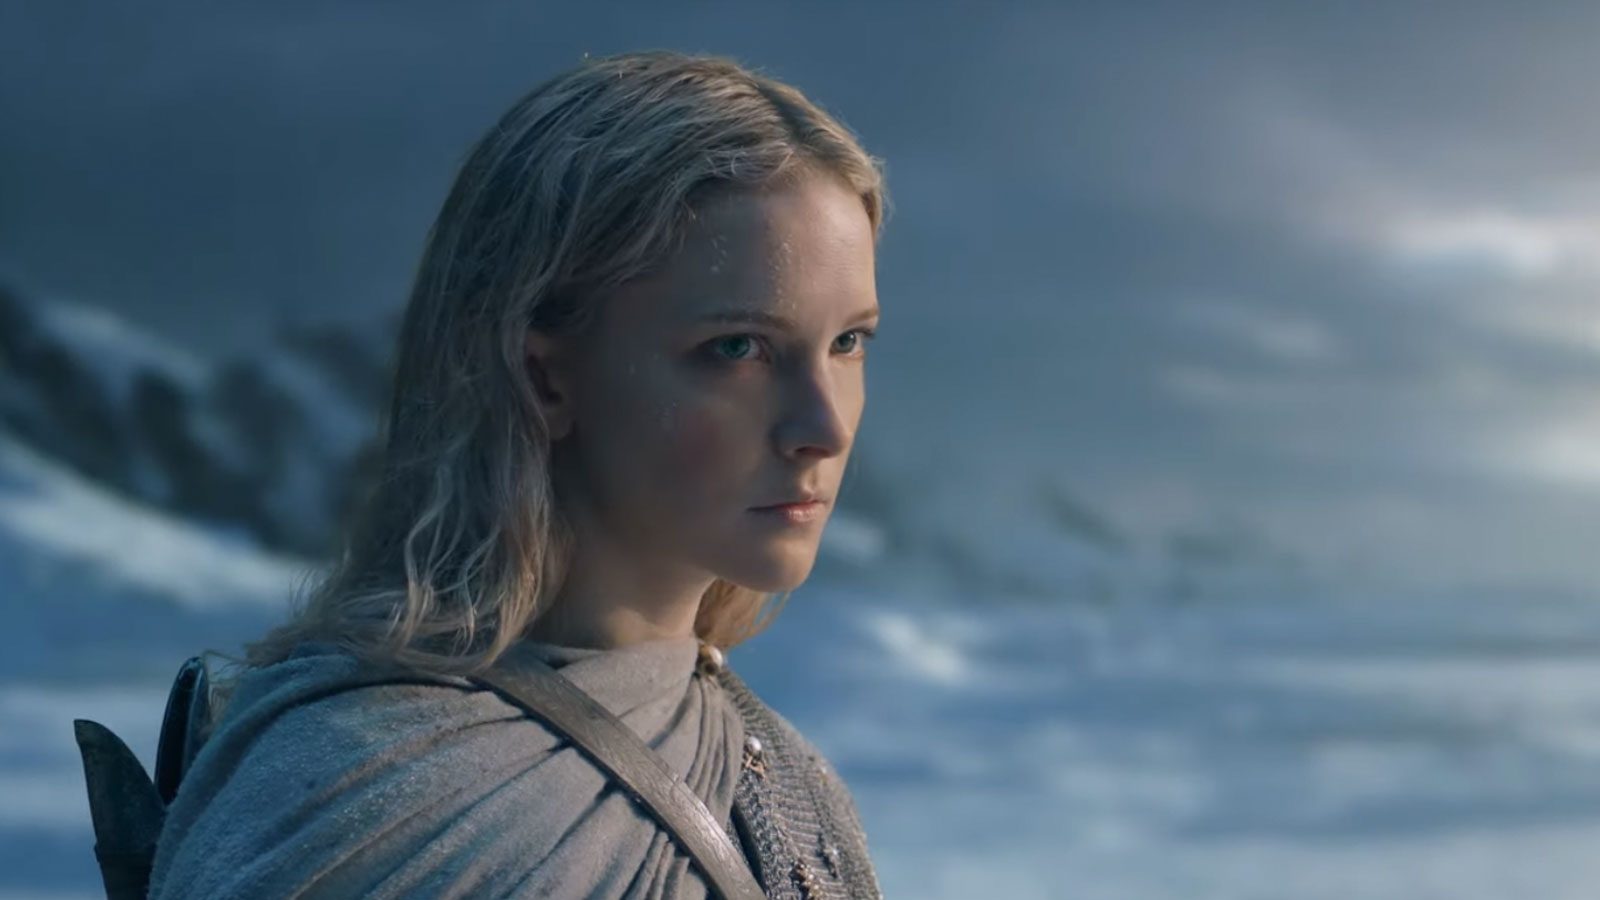 WATCH: ‘The Lord of the Rings: The Rings of Power’ drops first trailer